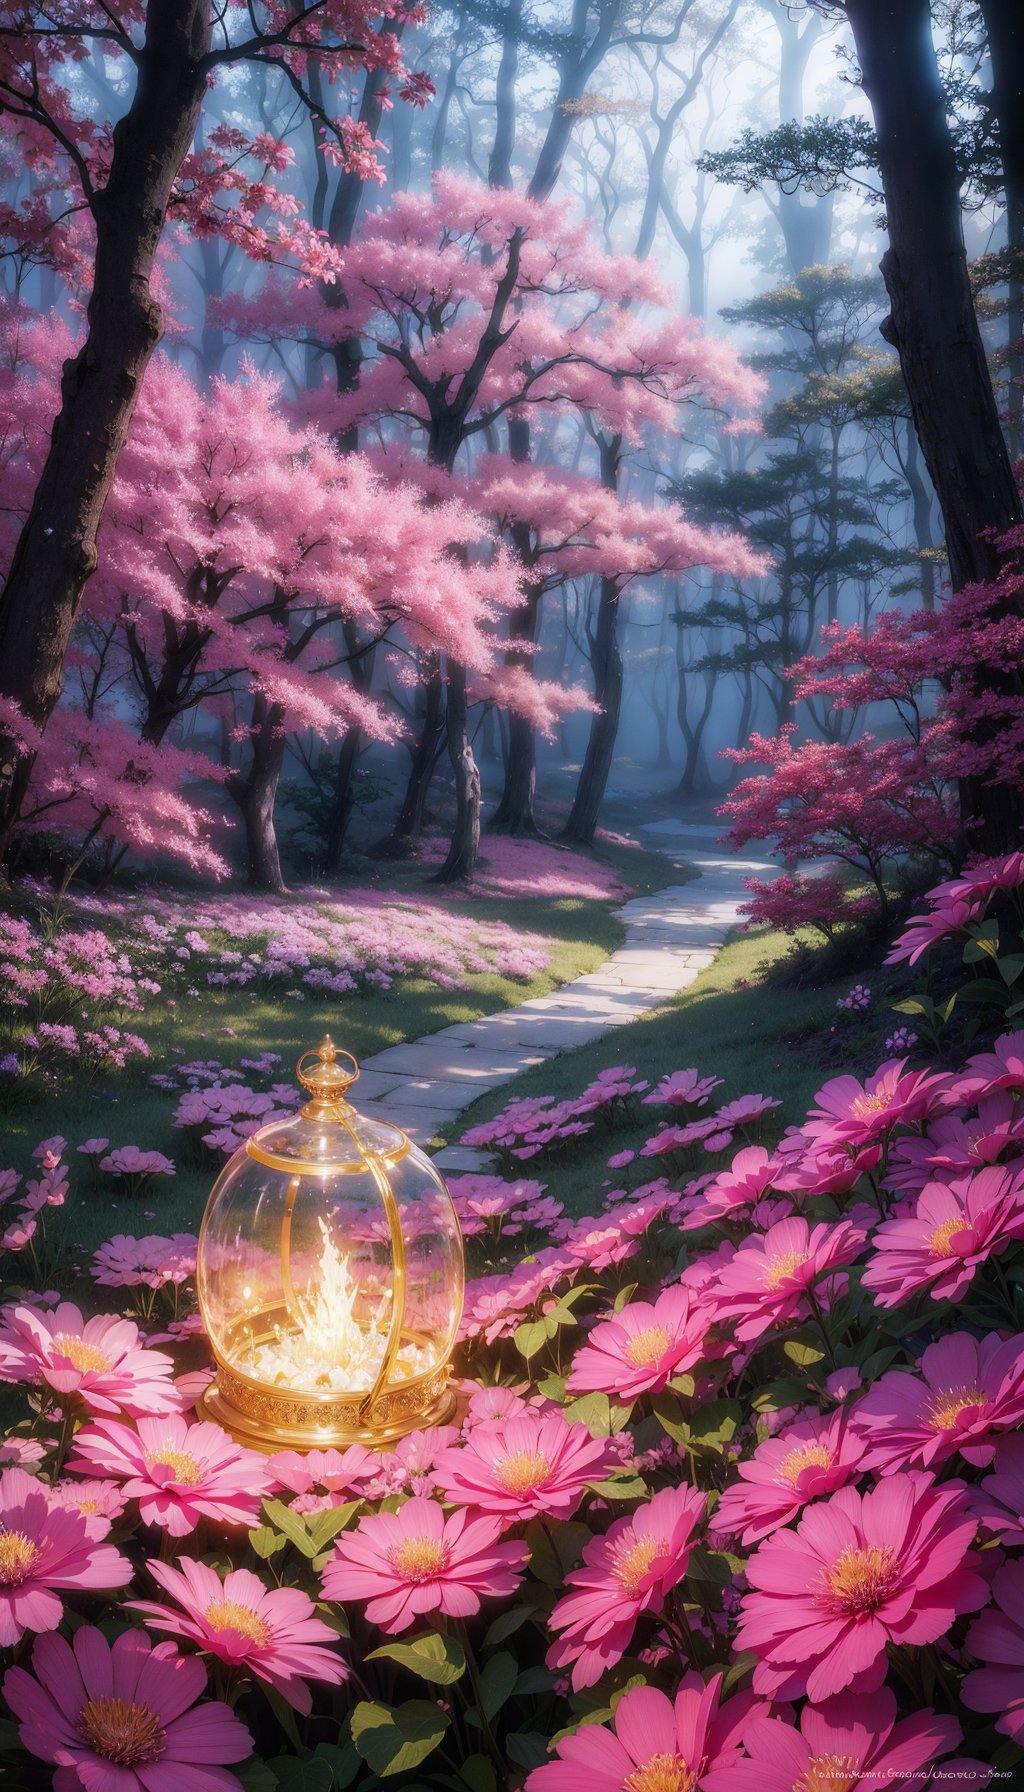 digital painting,
fantasy, hidden forest, centered big tree, glowing crystals, flowers, flowers petal, fog, at dawn